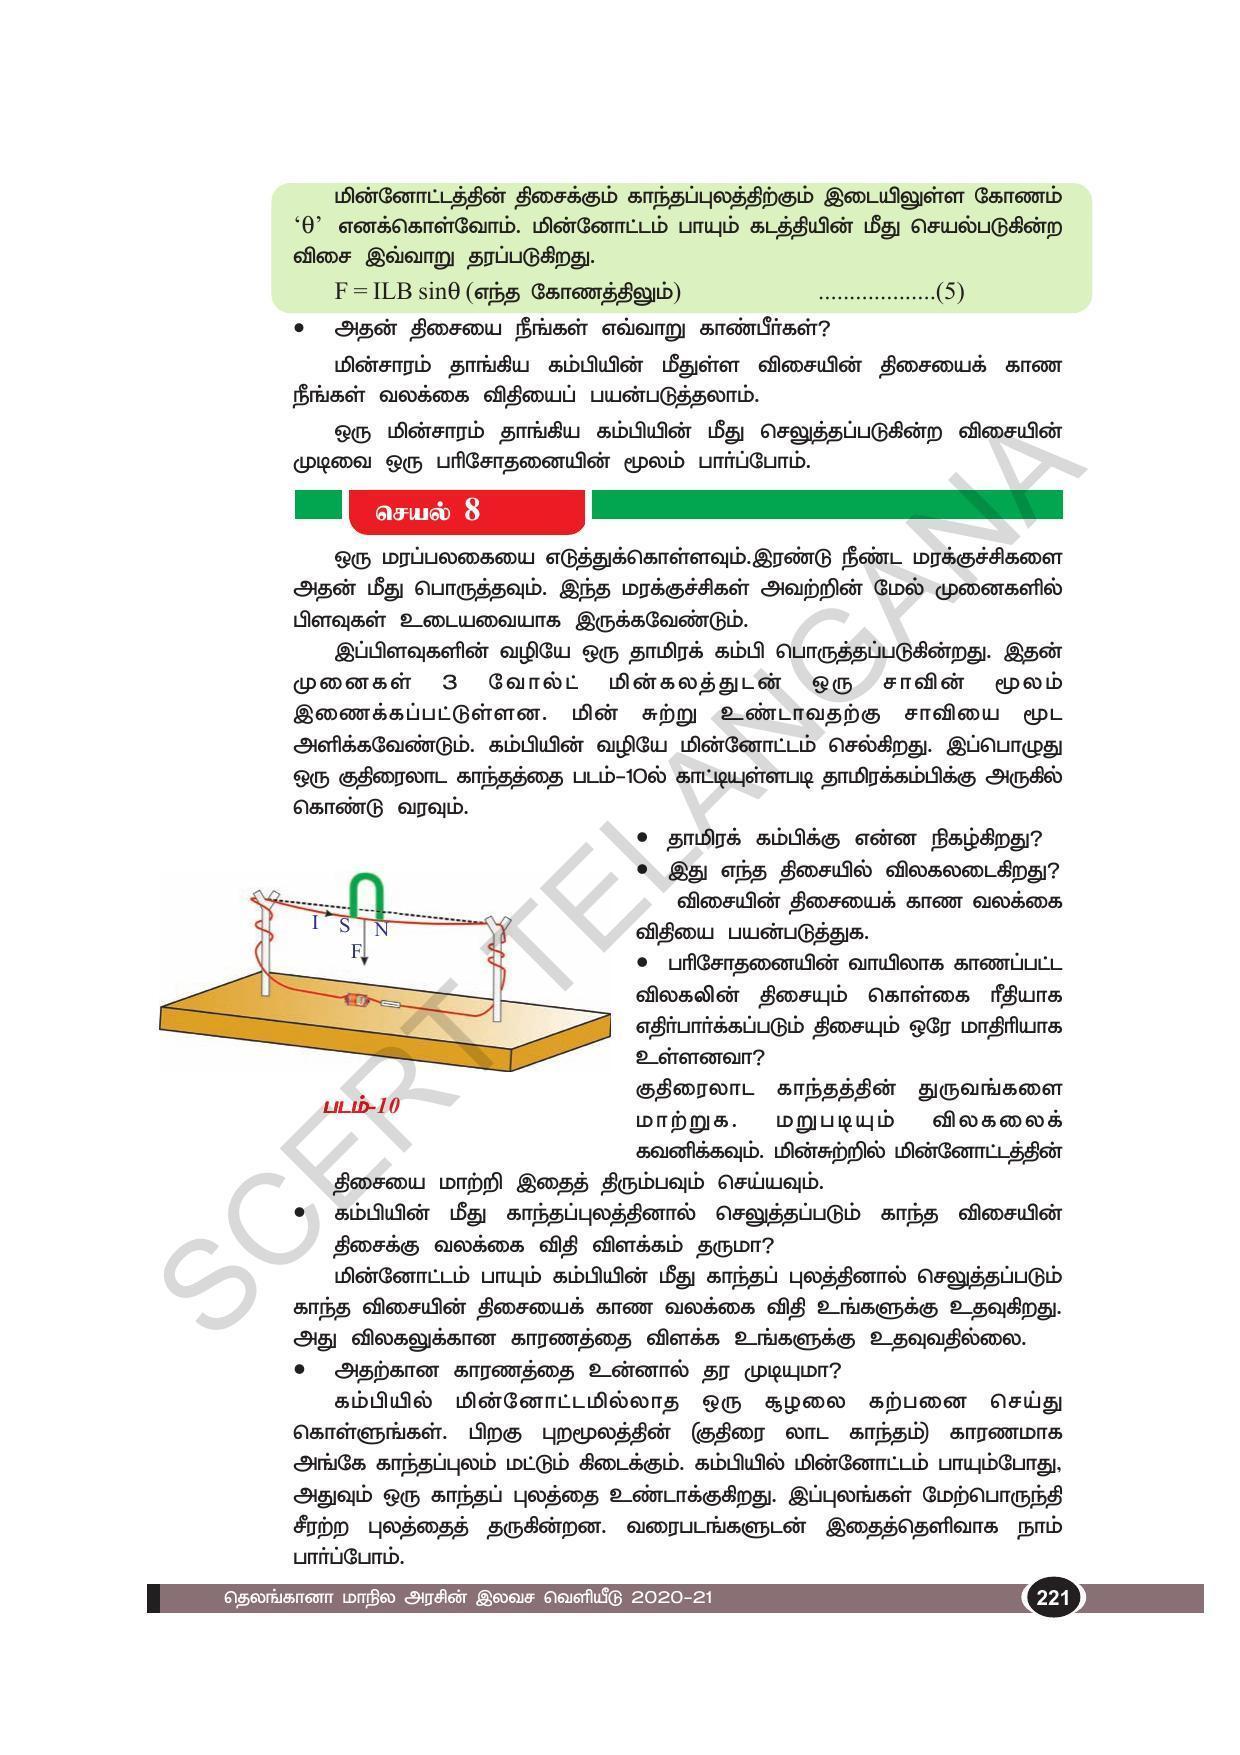 TS SCERT Class 10 Physical Science(Tamil Medium) Text Book - Page 233